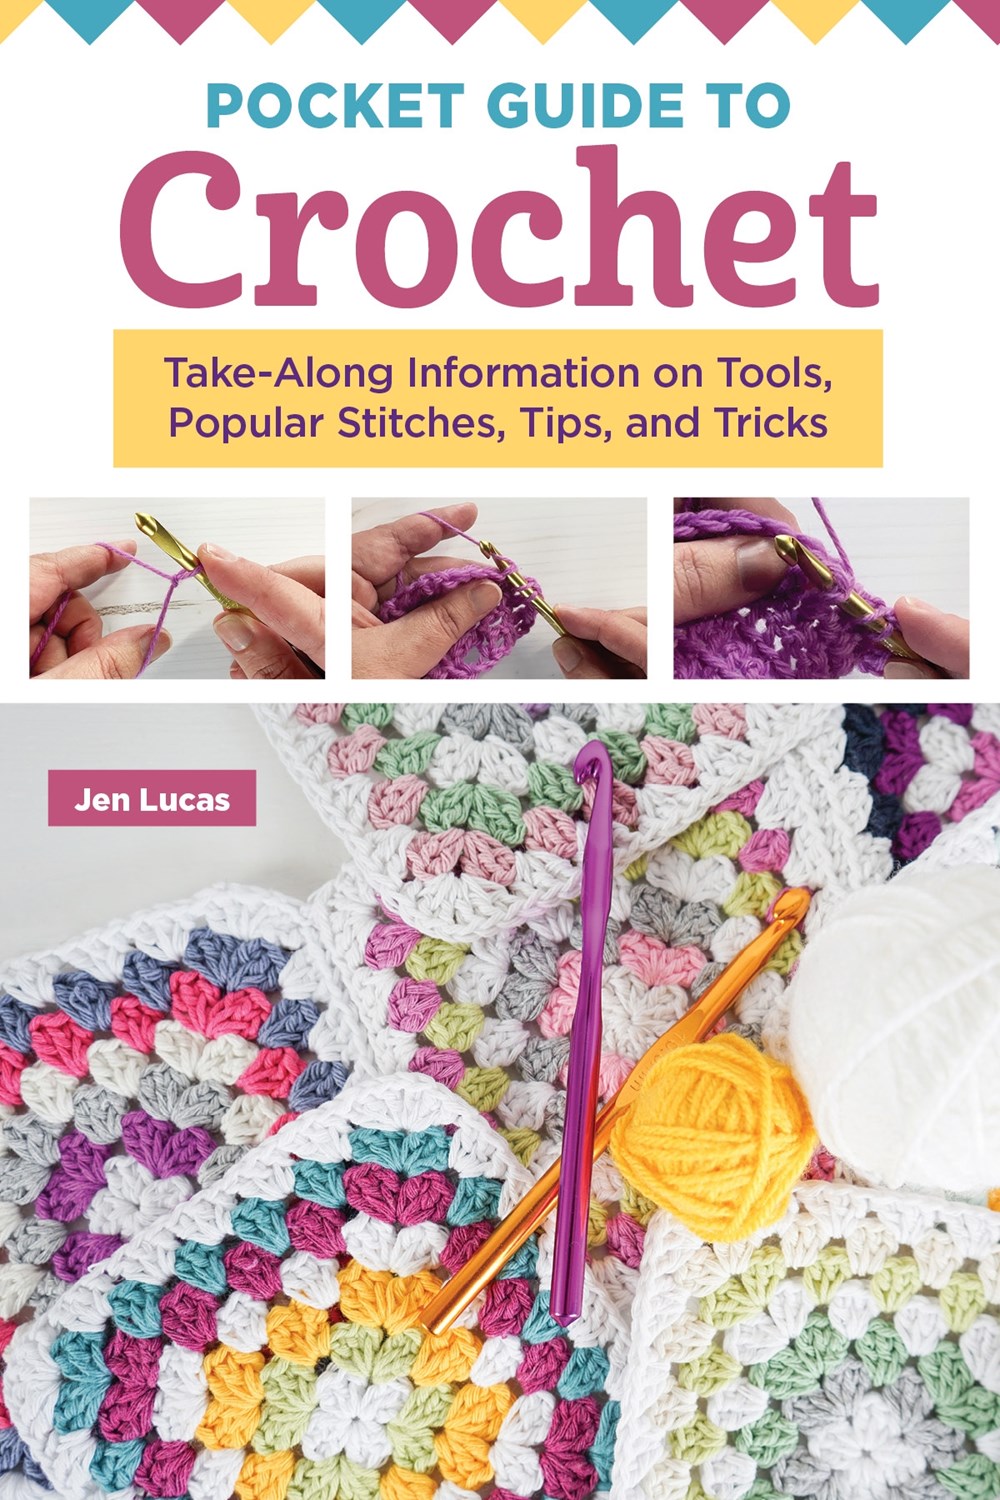 ‘Pocket Guide to Crochet: Take-Along Information on Tools, Popular Stitches, Tips, and Tricks’ by Jen Lucas | LJ Review of the Day